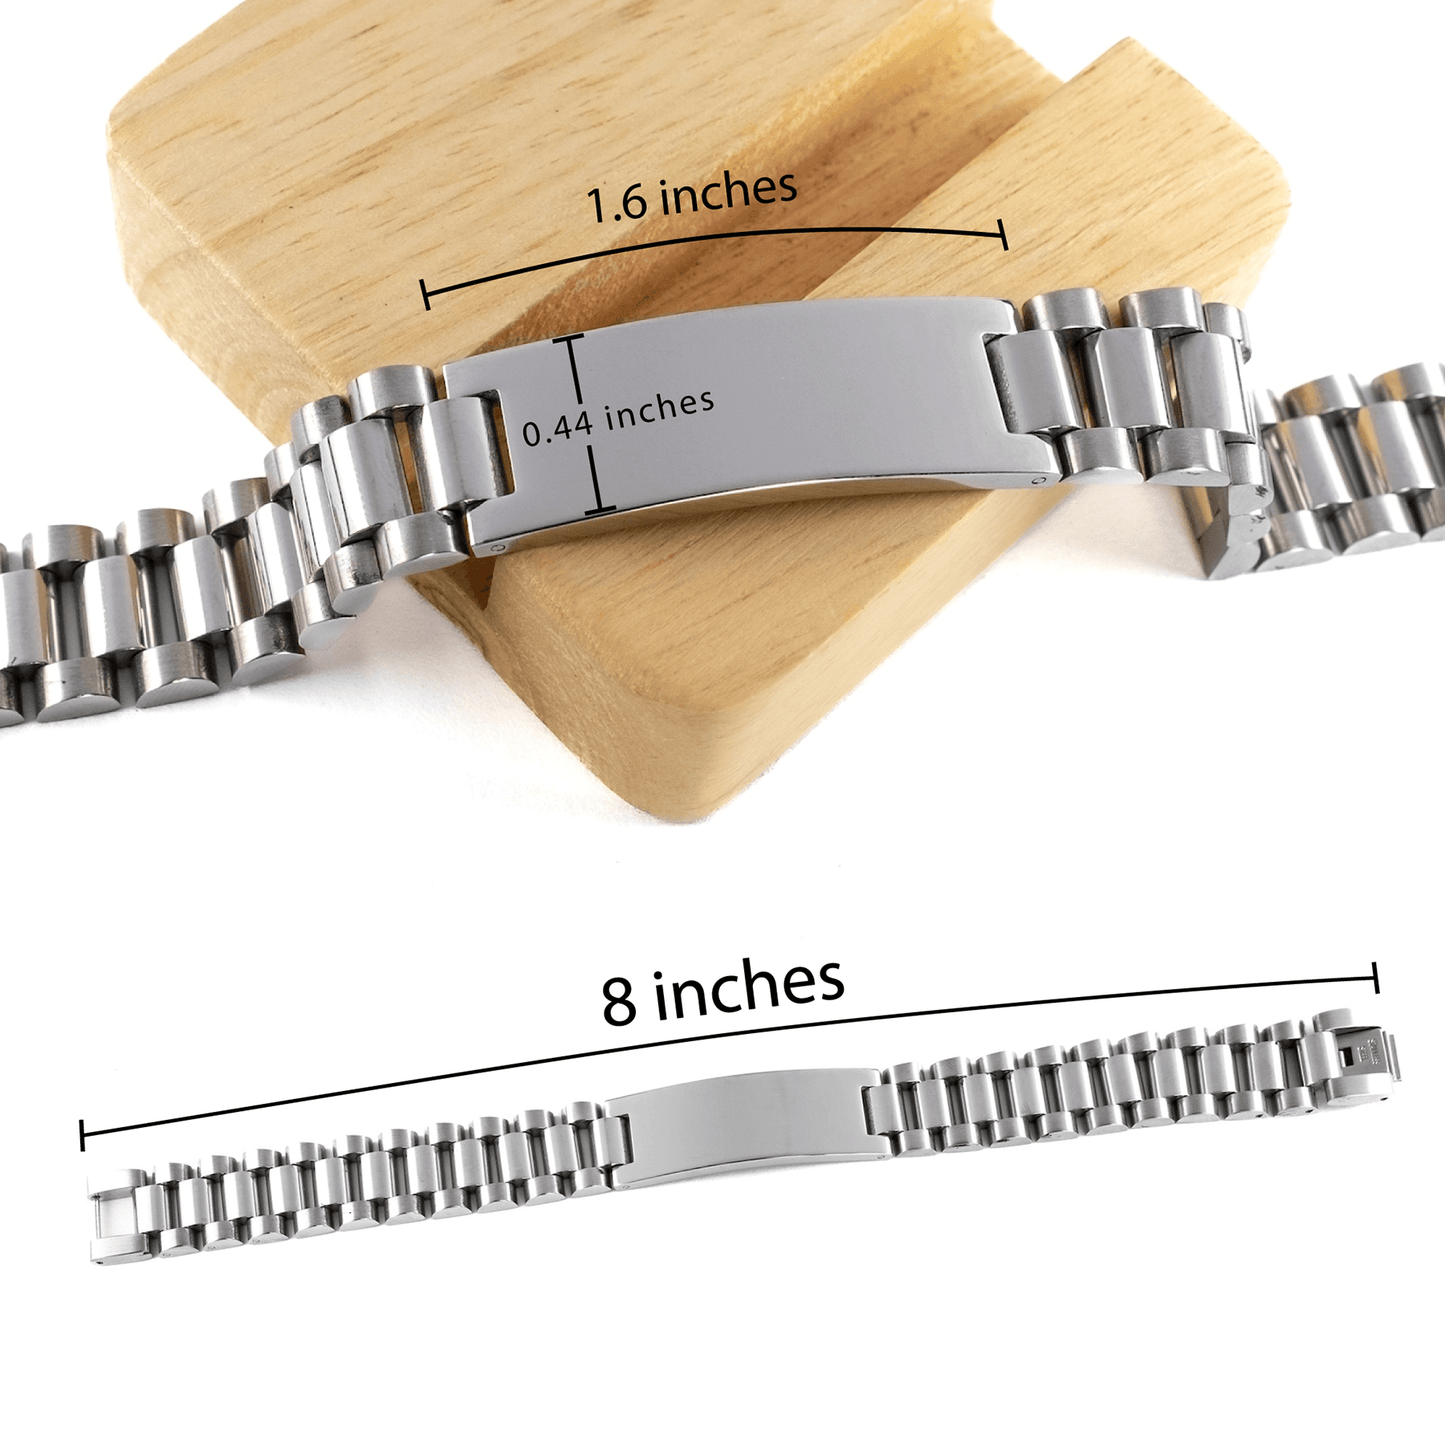 Father In Law Christmas Perfect Gifts, Father In Law Ladder Stainless Steel Bracelet, Motivational Father In Law Engraved Gifts, Birthday Gifts For Father In Law, To My Father In Law Life is learning to dance in the rain, finding good in each day. I'm alw